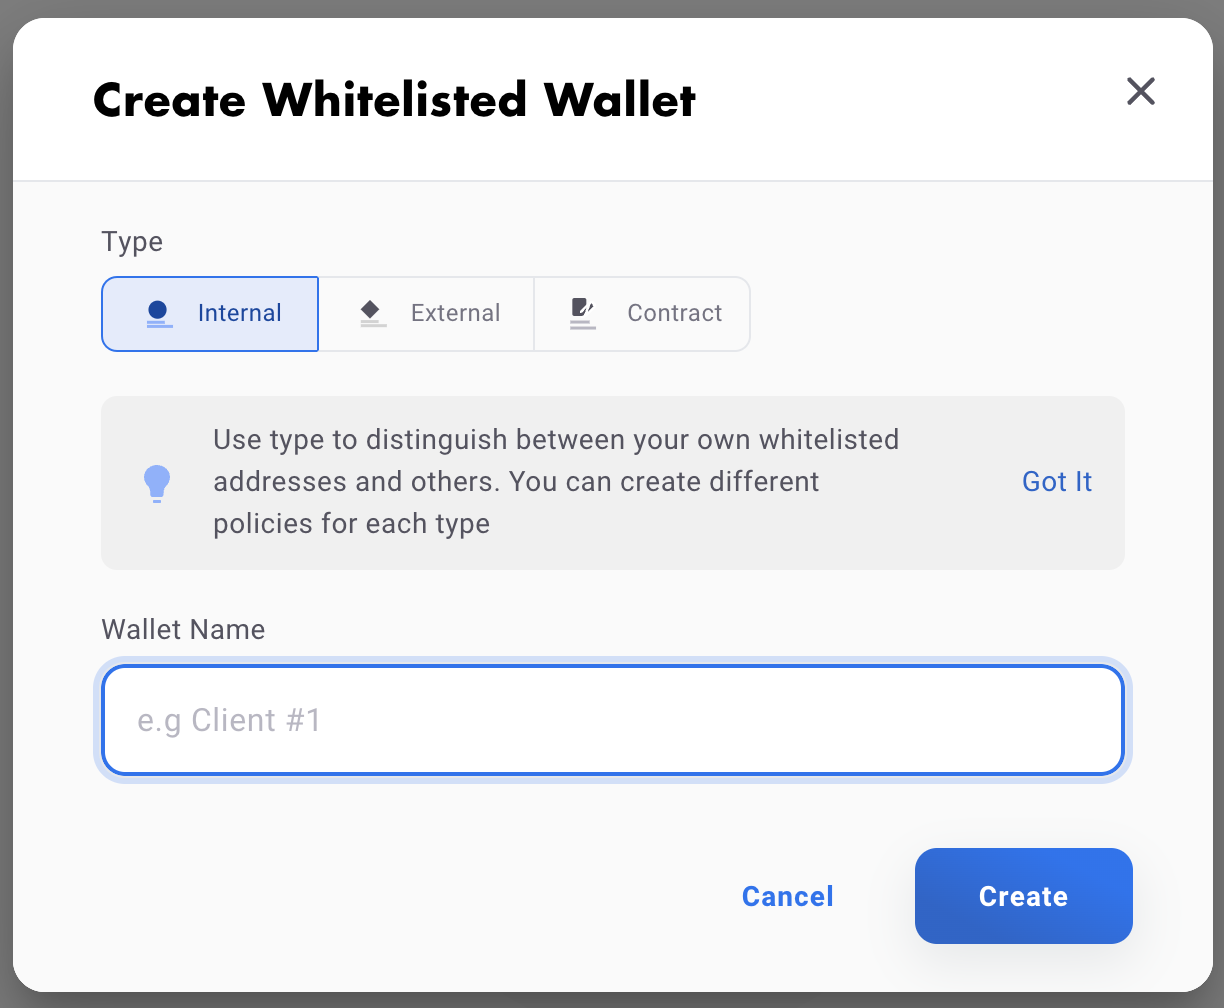 create whitelisted wallet console dialog